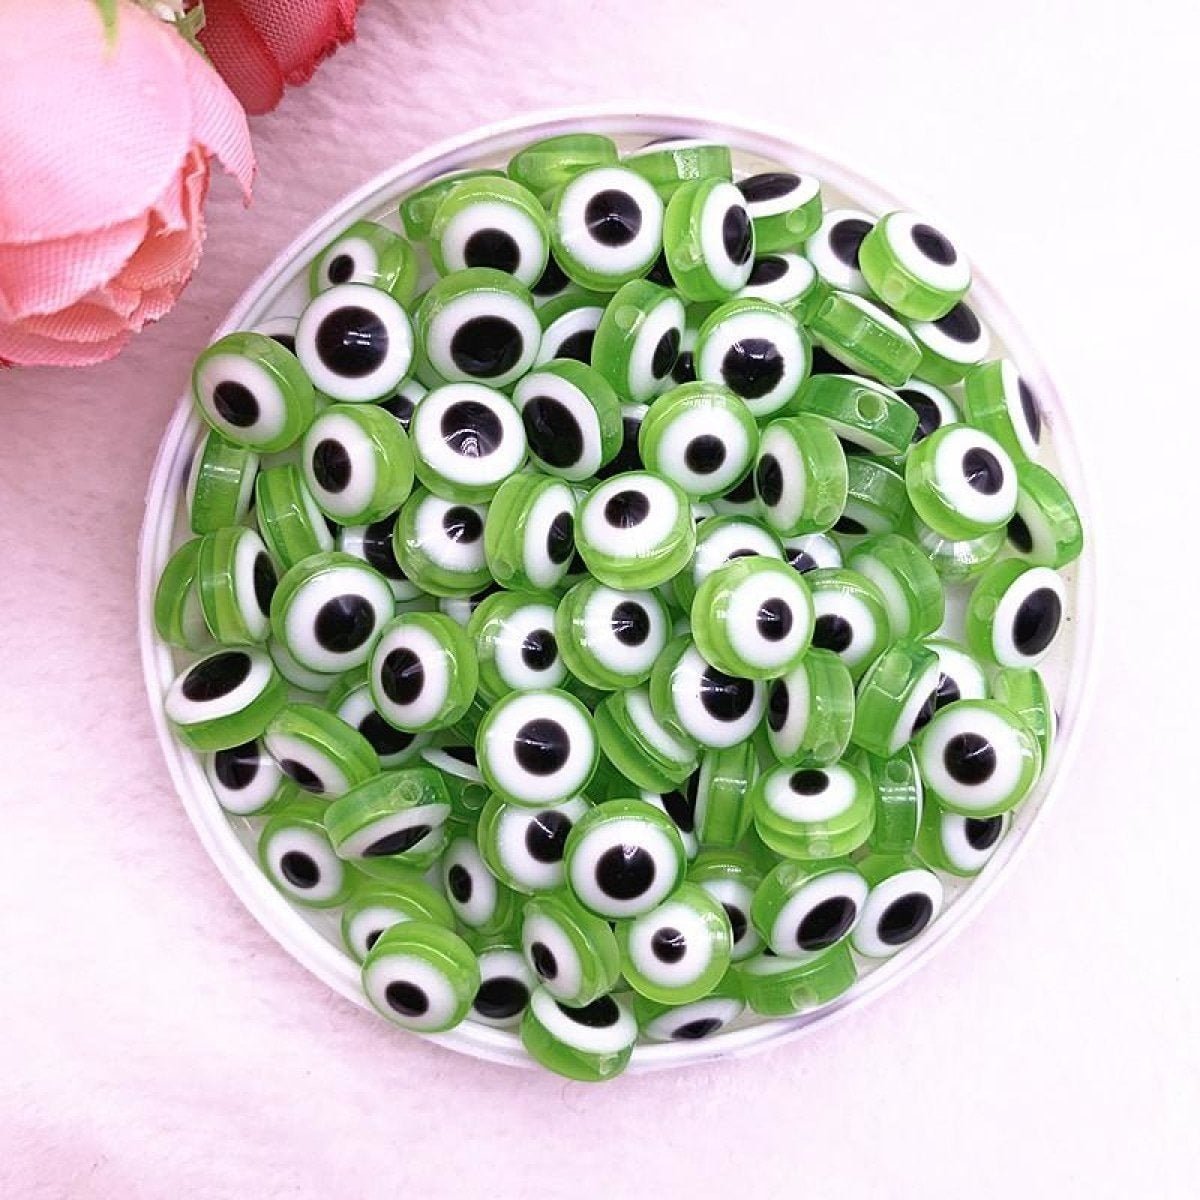 48pcs 8/10mm Resin Spacer Beads Double Sided Eyes for Jewellery Making DIY Bracelet Beads Flat Backed - Green 8mm - - Asia Sell